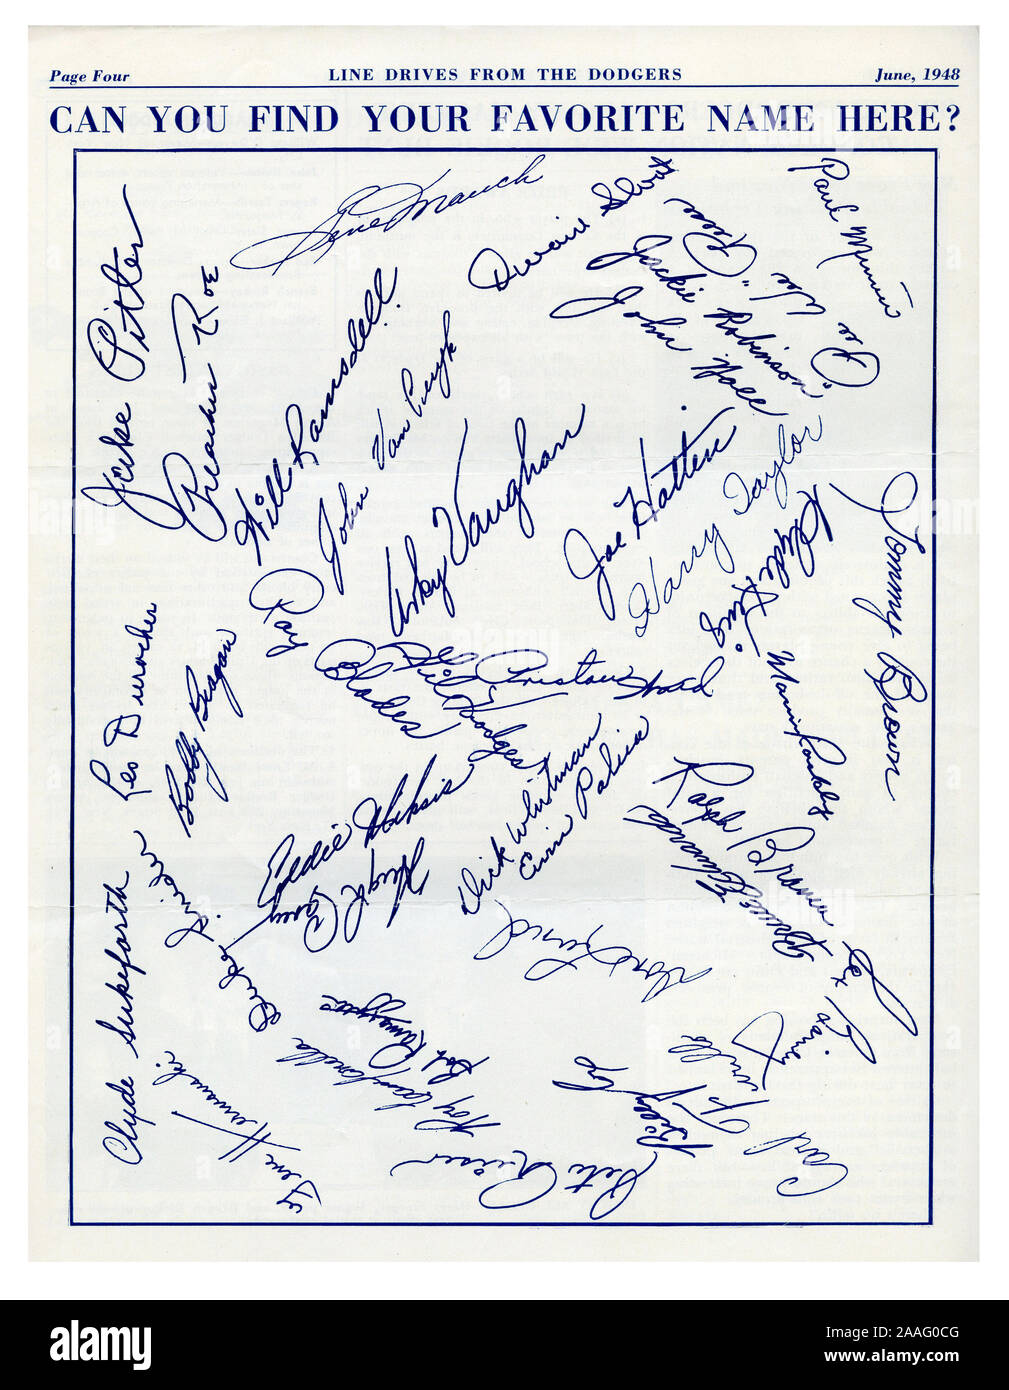 A page in the June 1948 edition of Dodgers Line Drives, the newsletter for the Brooklyn Dodgers to communicate with their fans, displays autographs of all the team's players including Jackie Robinson, who in 1947 became the first African American to cross the major league color line and begin integrating the game. Stock Photo